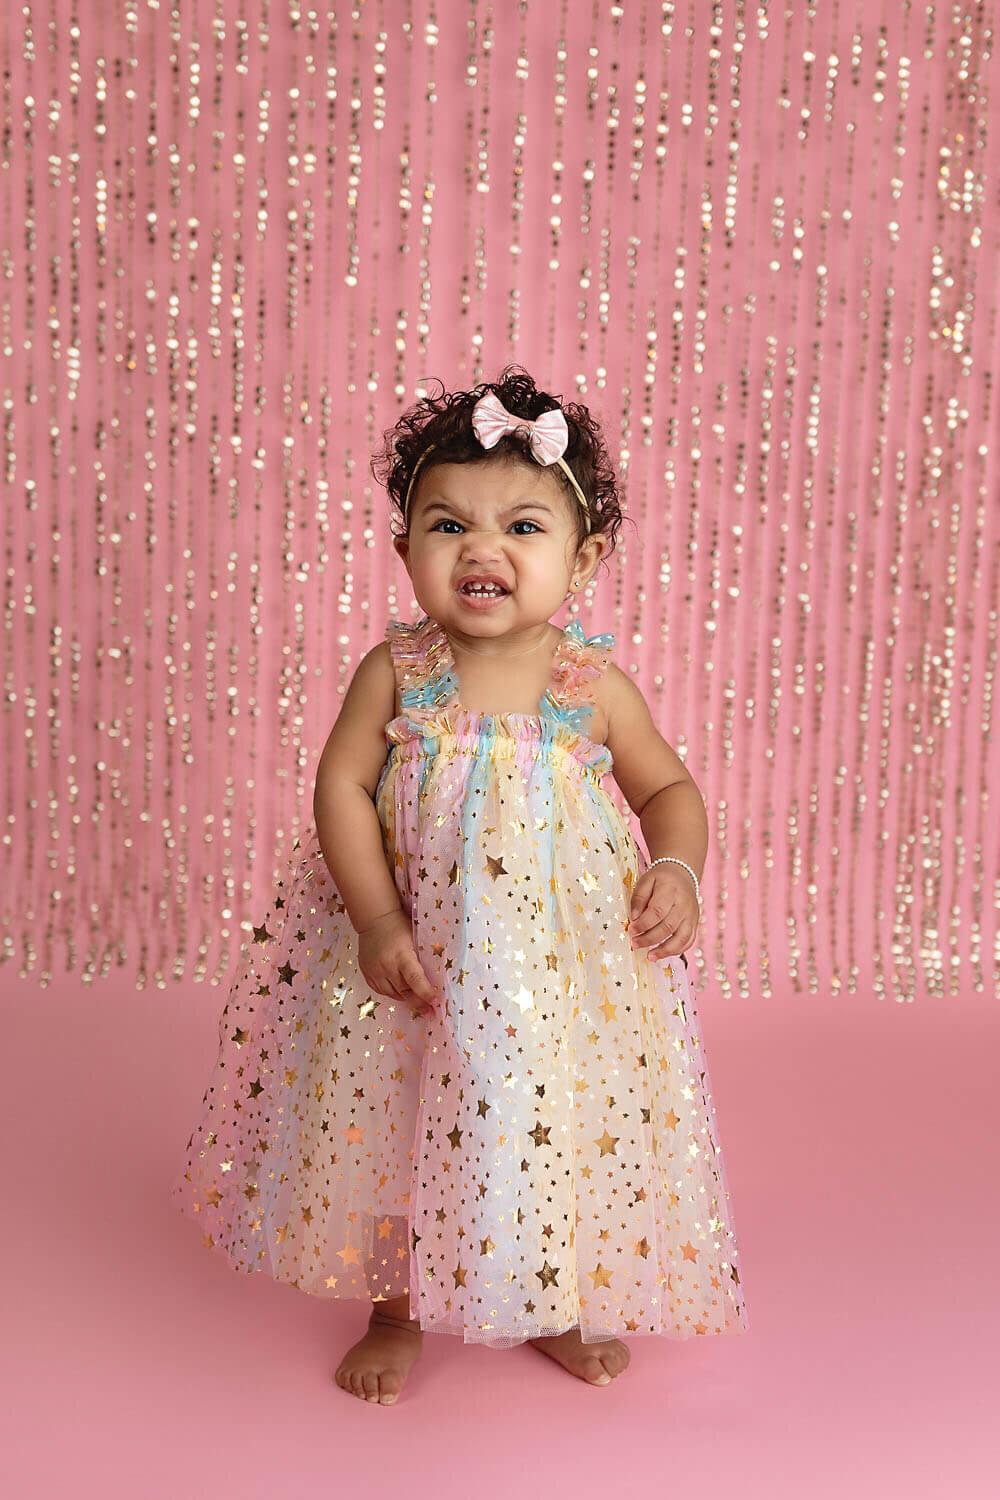 A young toddler girl in a rainbow princess dress makes a grumpy face while standing in a studio